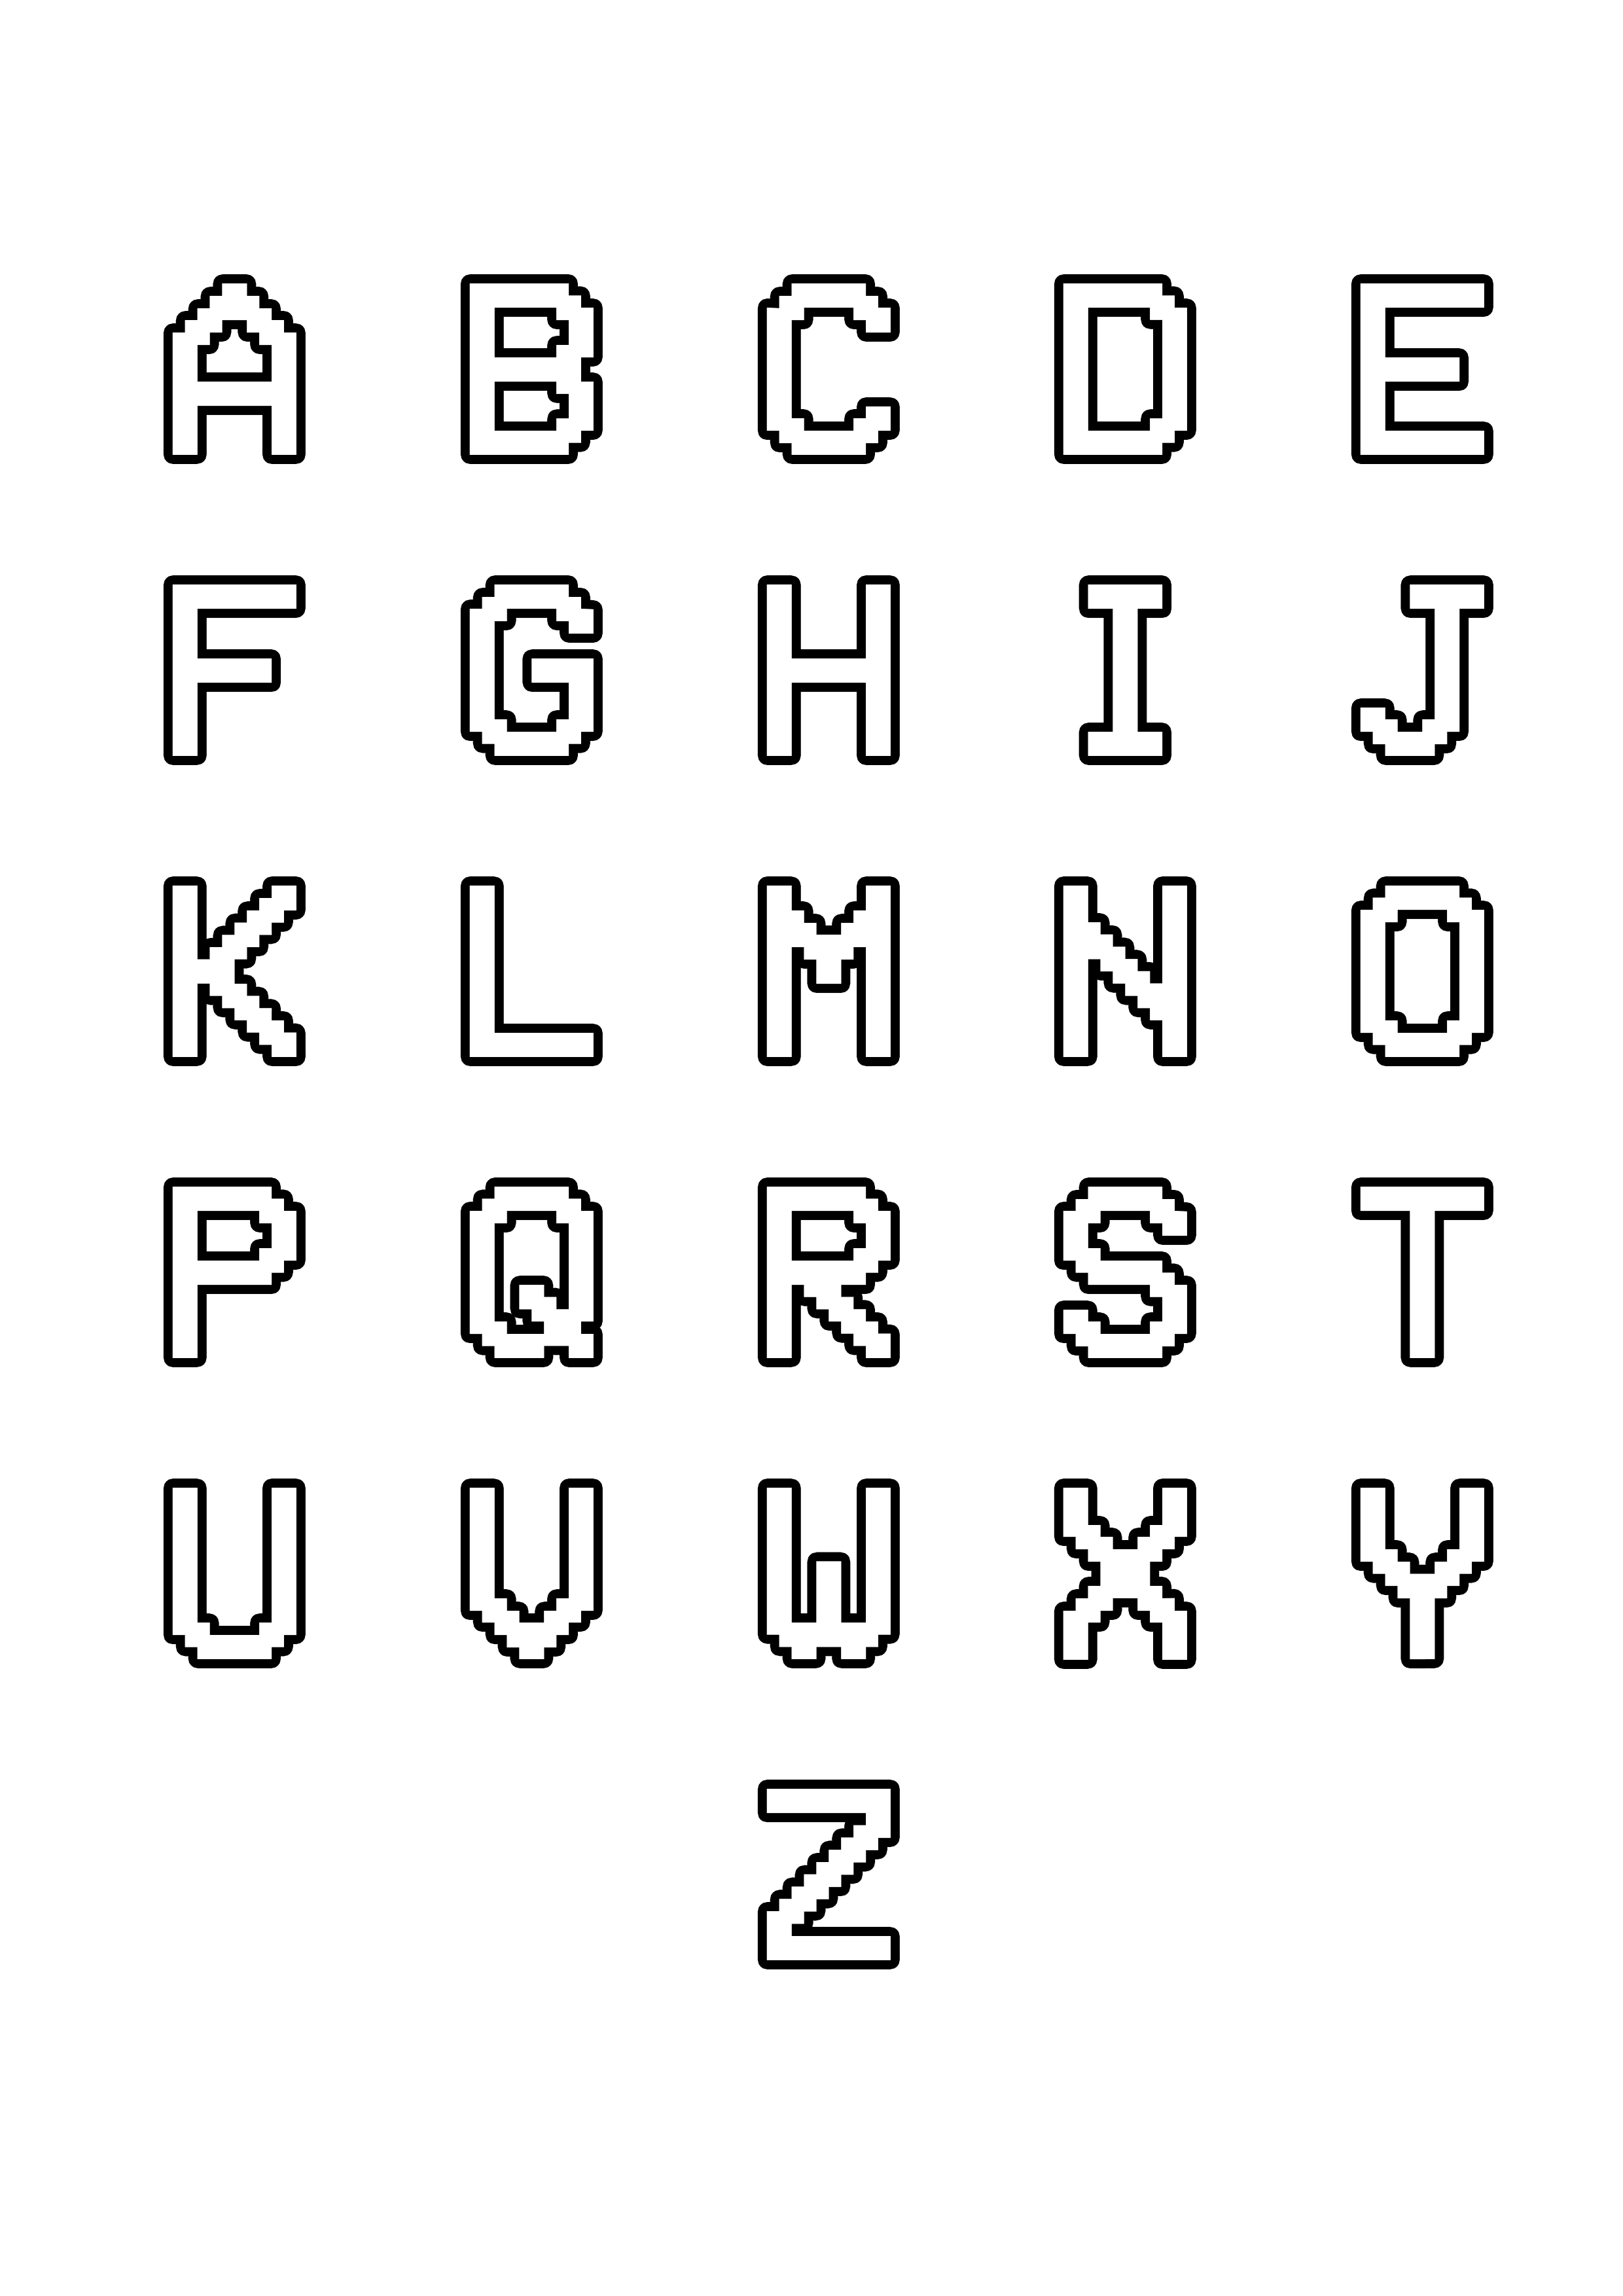 4600 Simple Alphabet Coloring Pages  Images